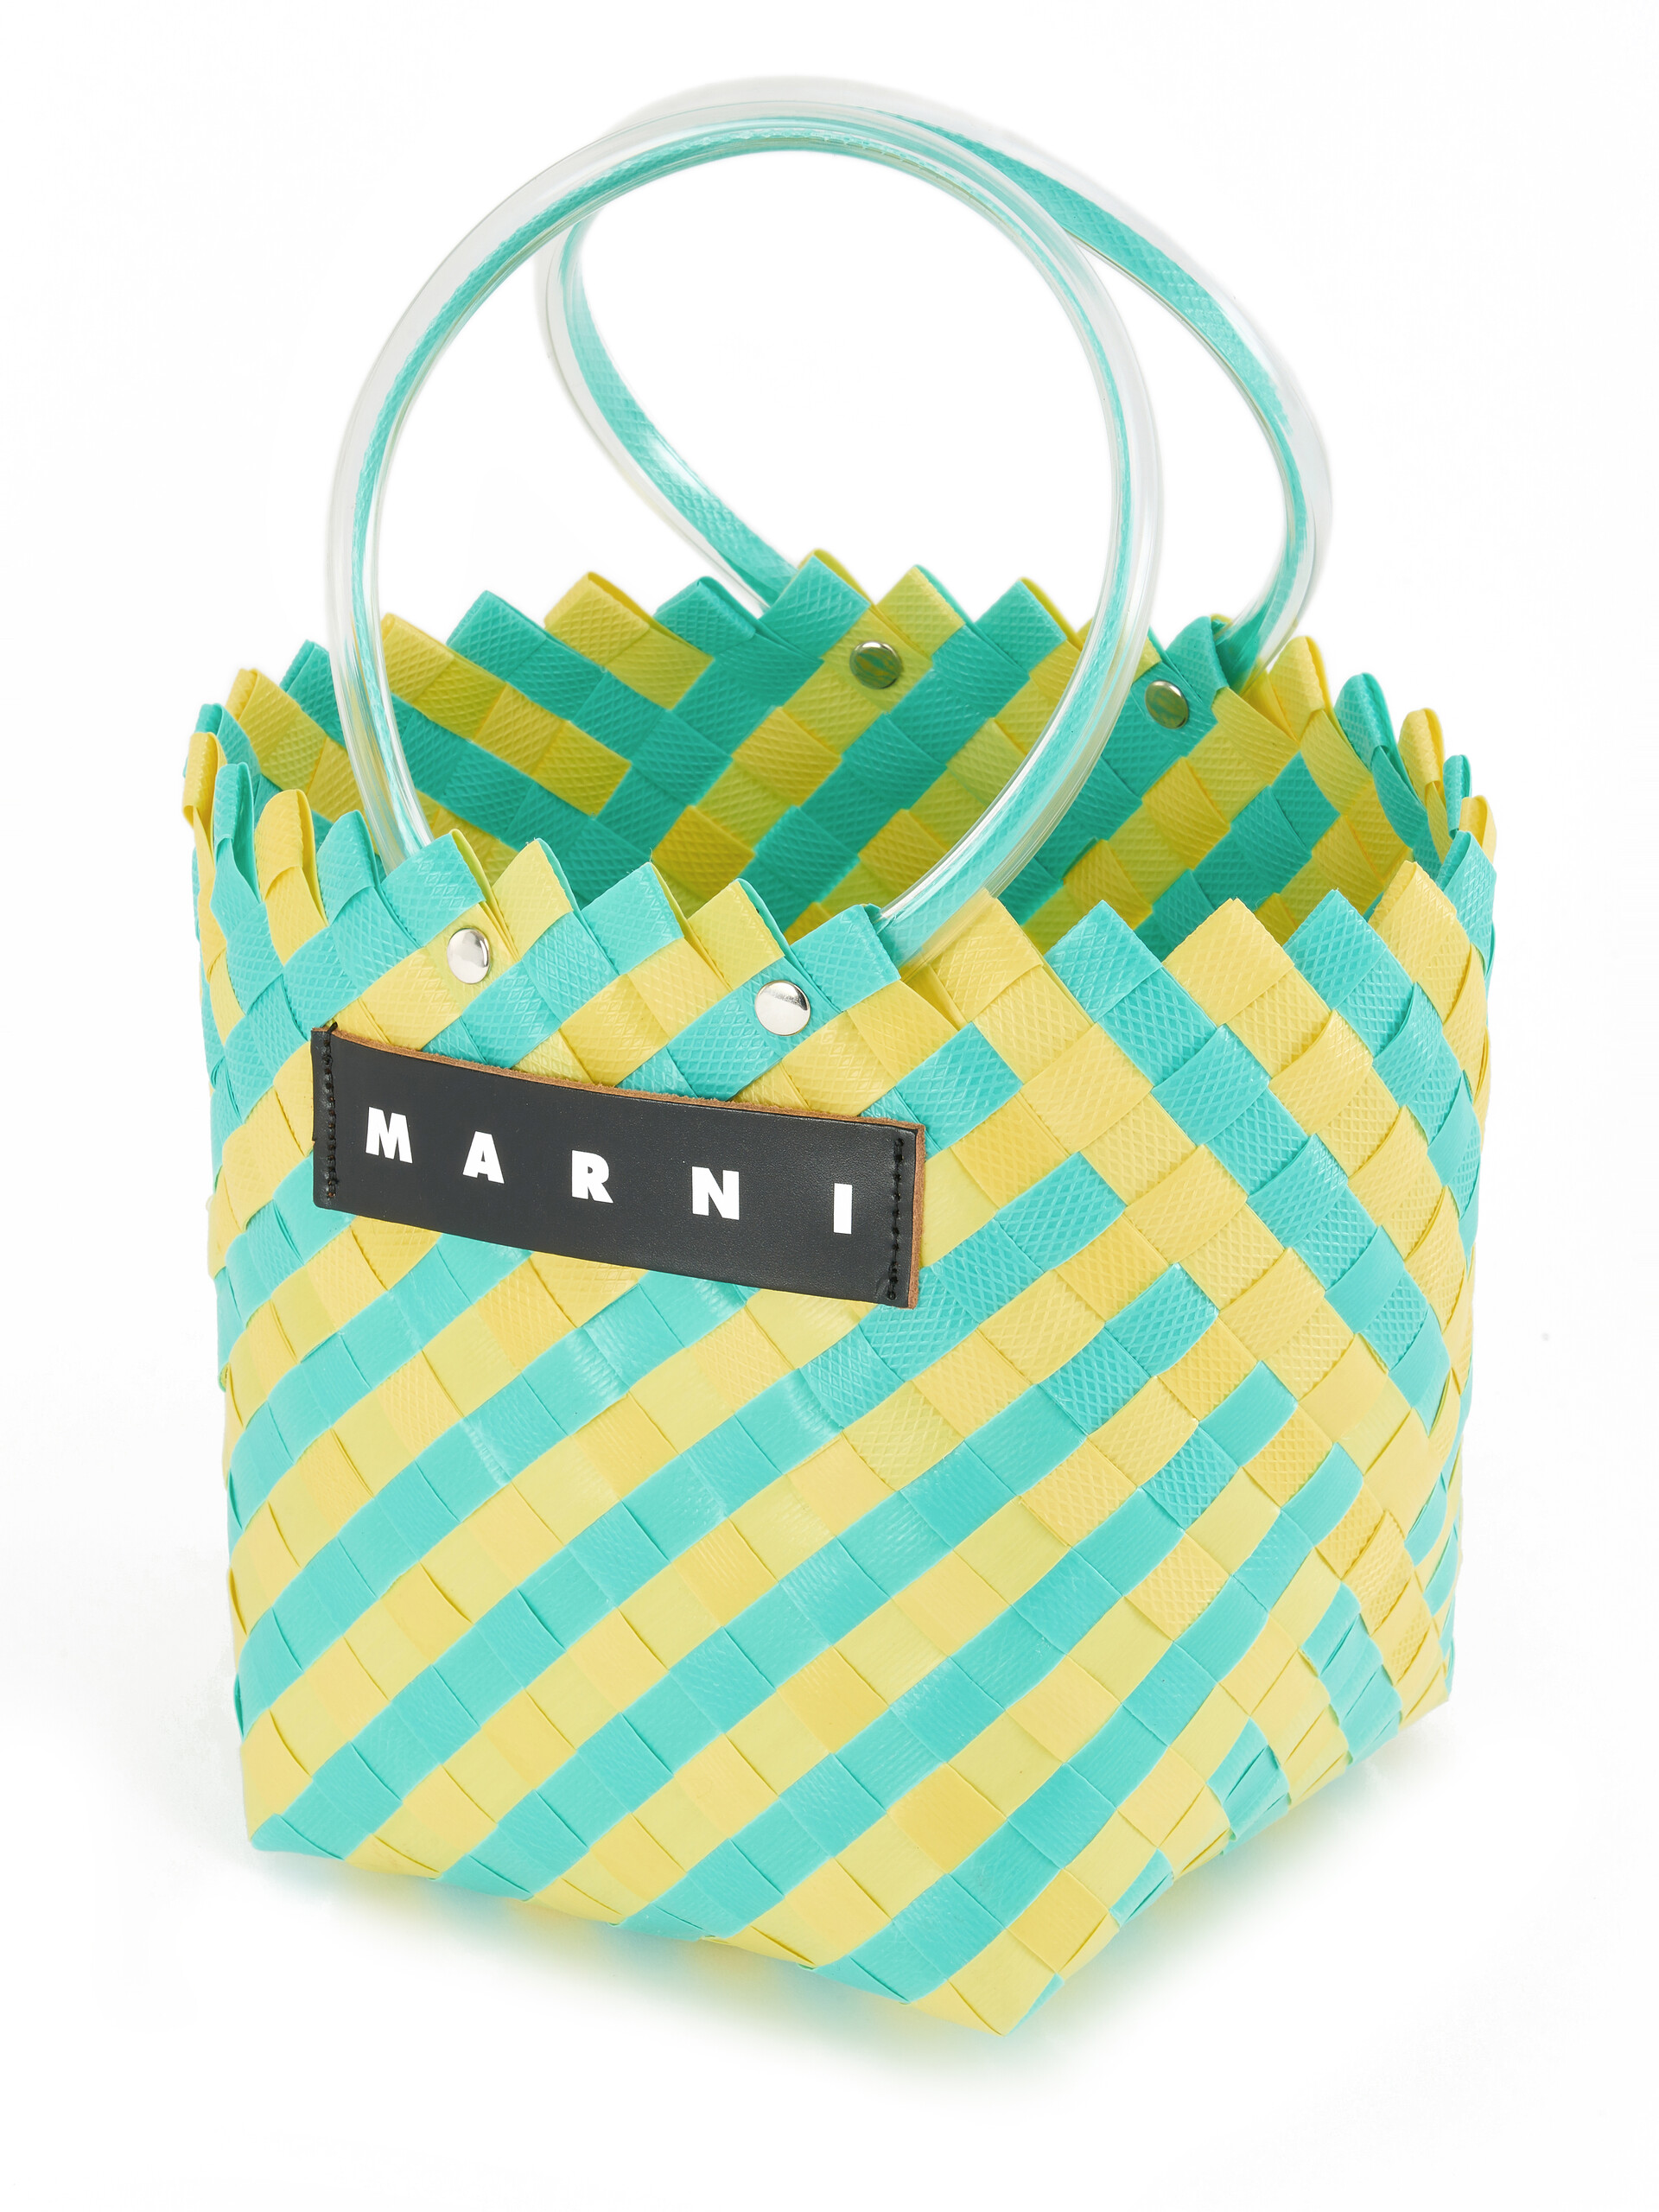 MARNI MARKET TAHA bag in green and burgundy woven material - Shopping Bags - Image 4